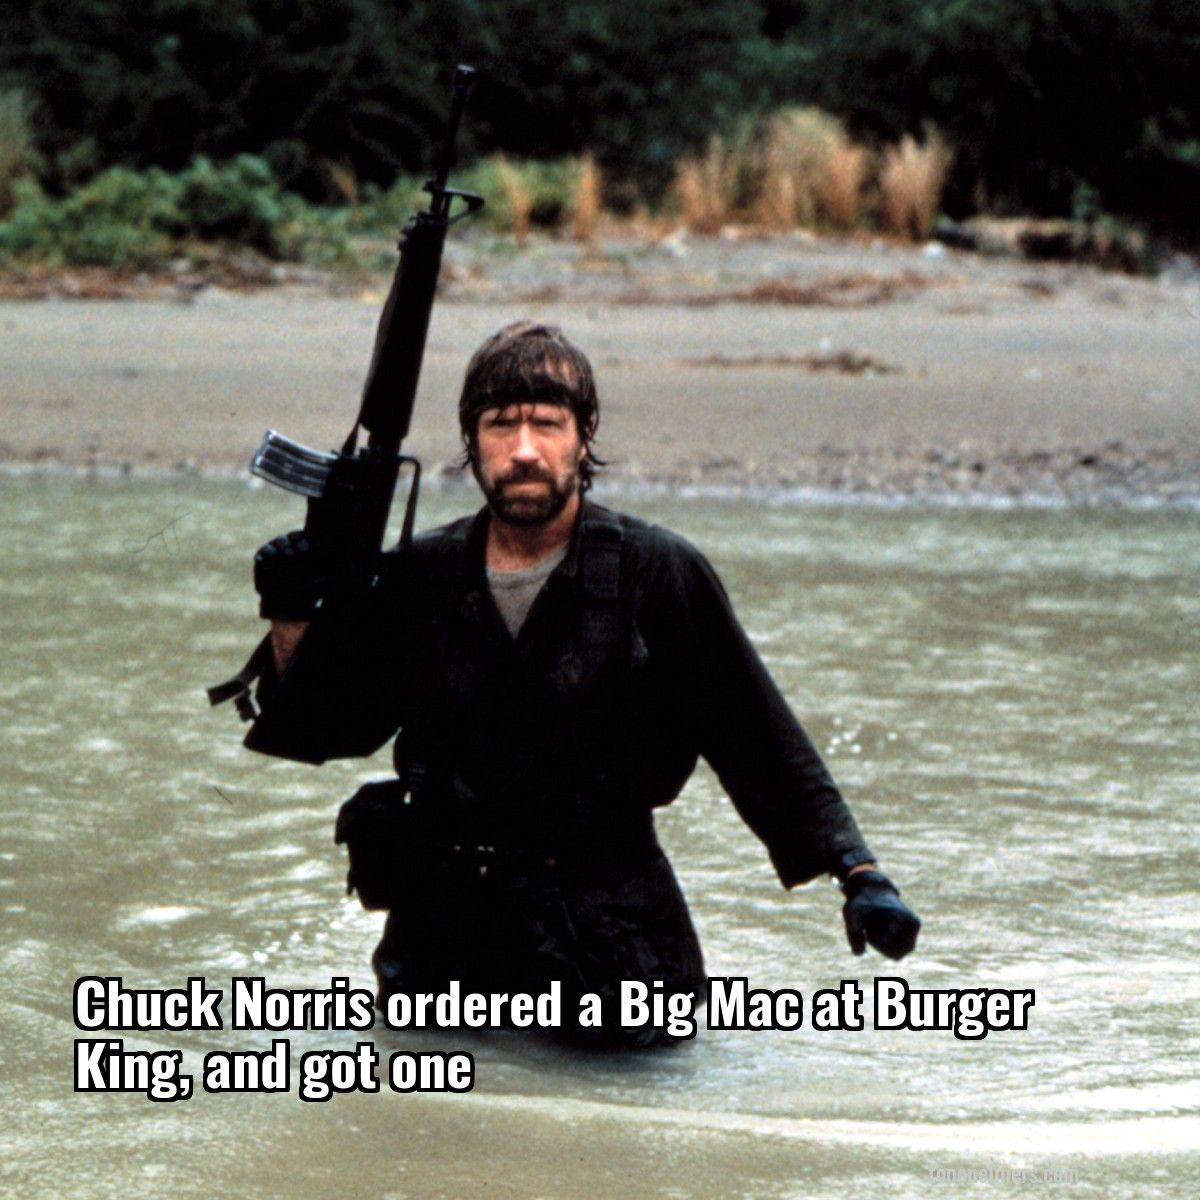 Chuck Norris ordered a Big Mac at Burger King, and got one